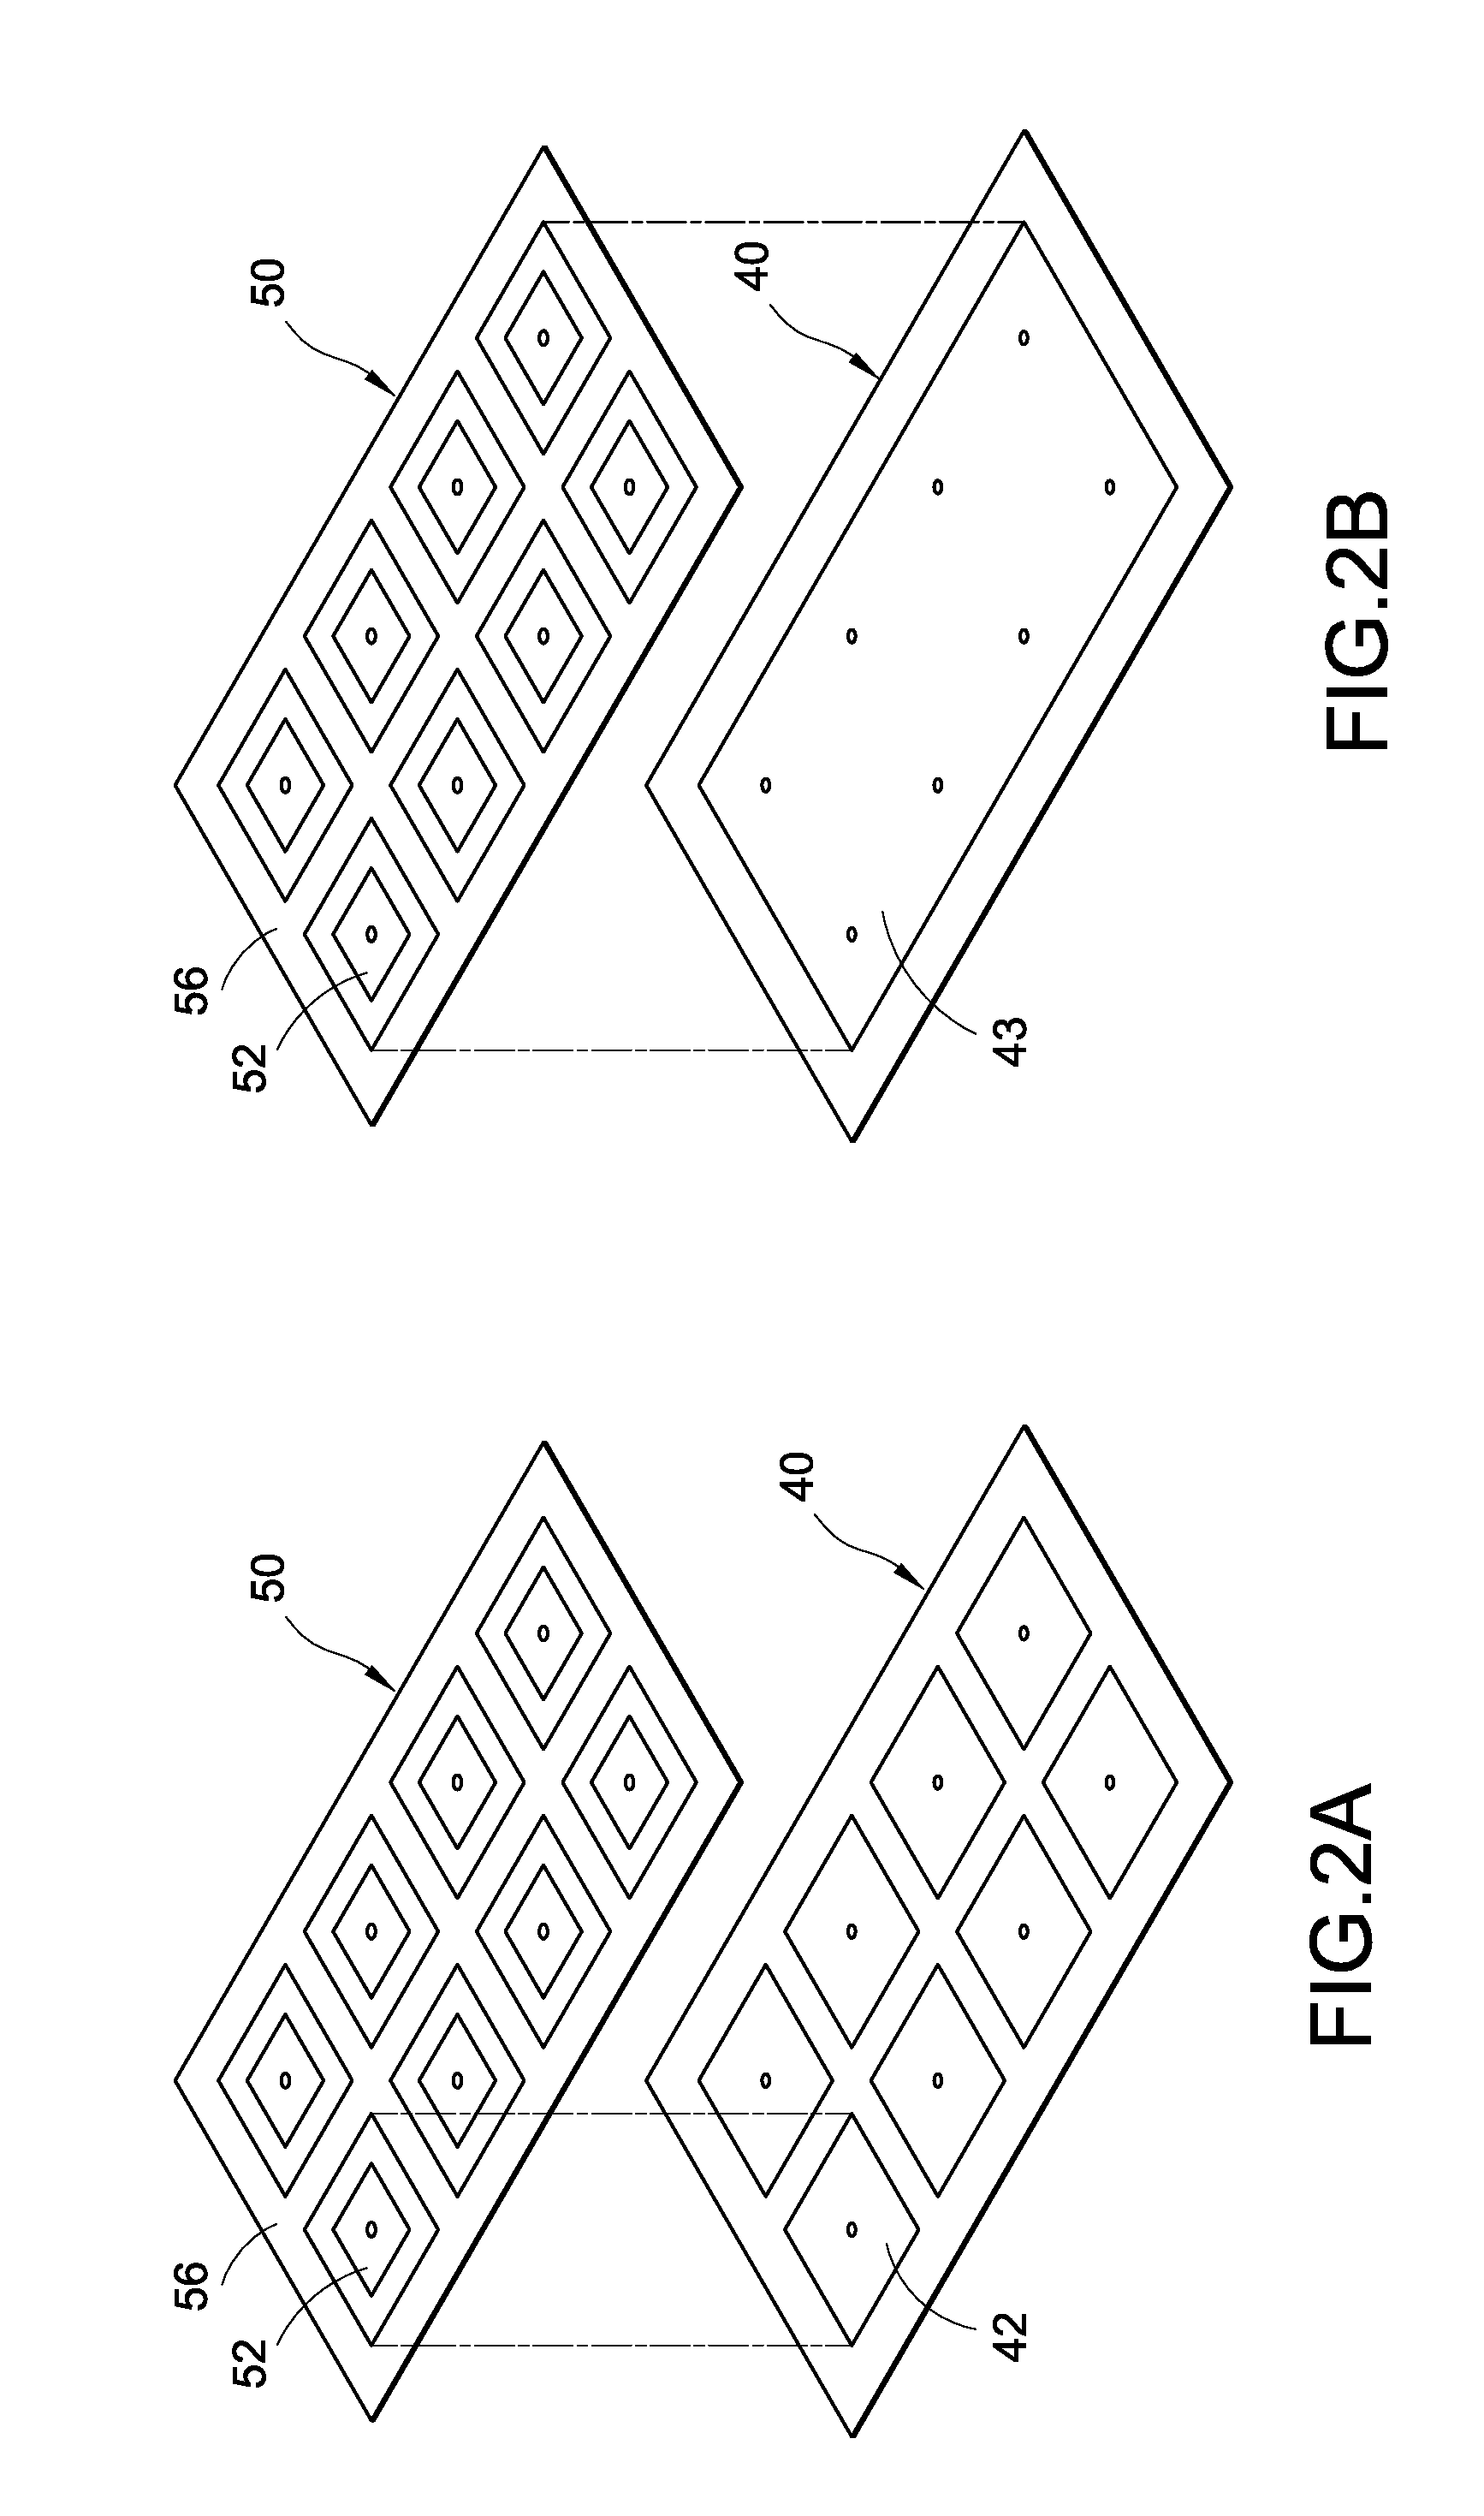 Biometric recognition apparatus with reflection-shielding electrode